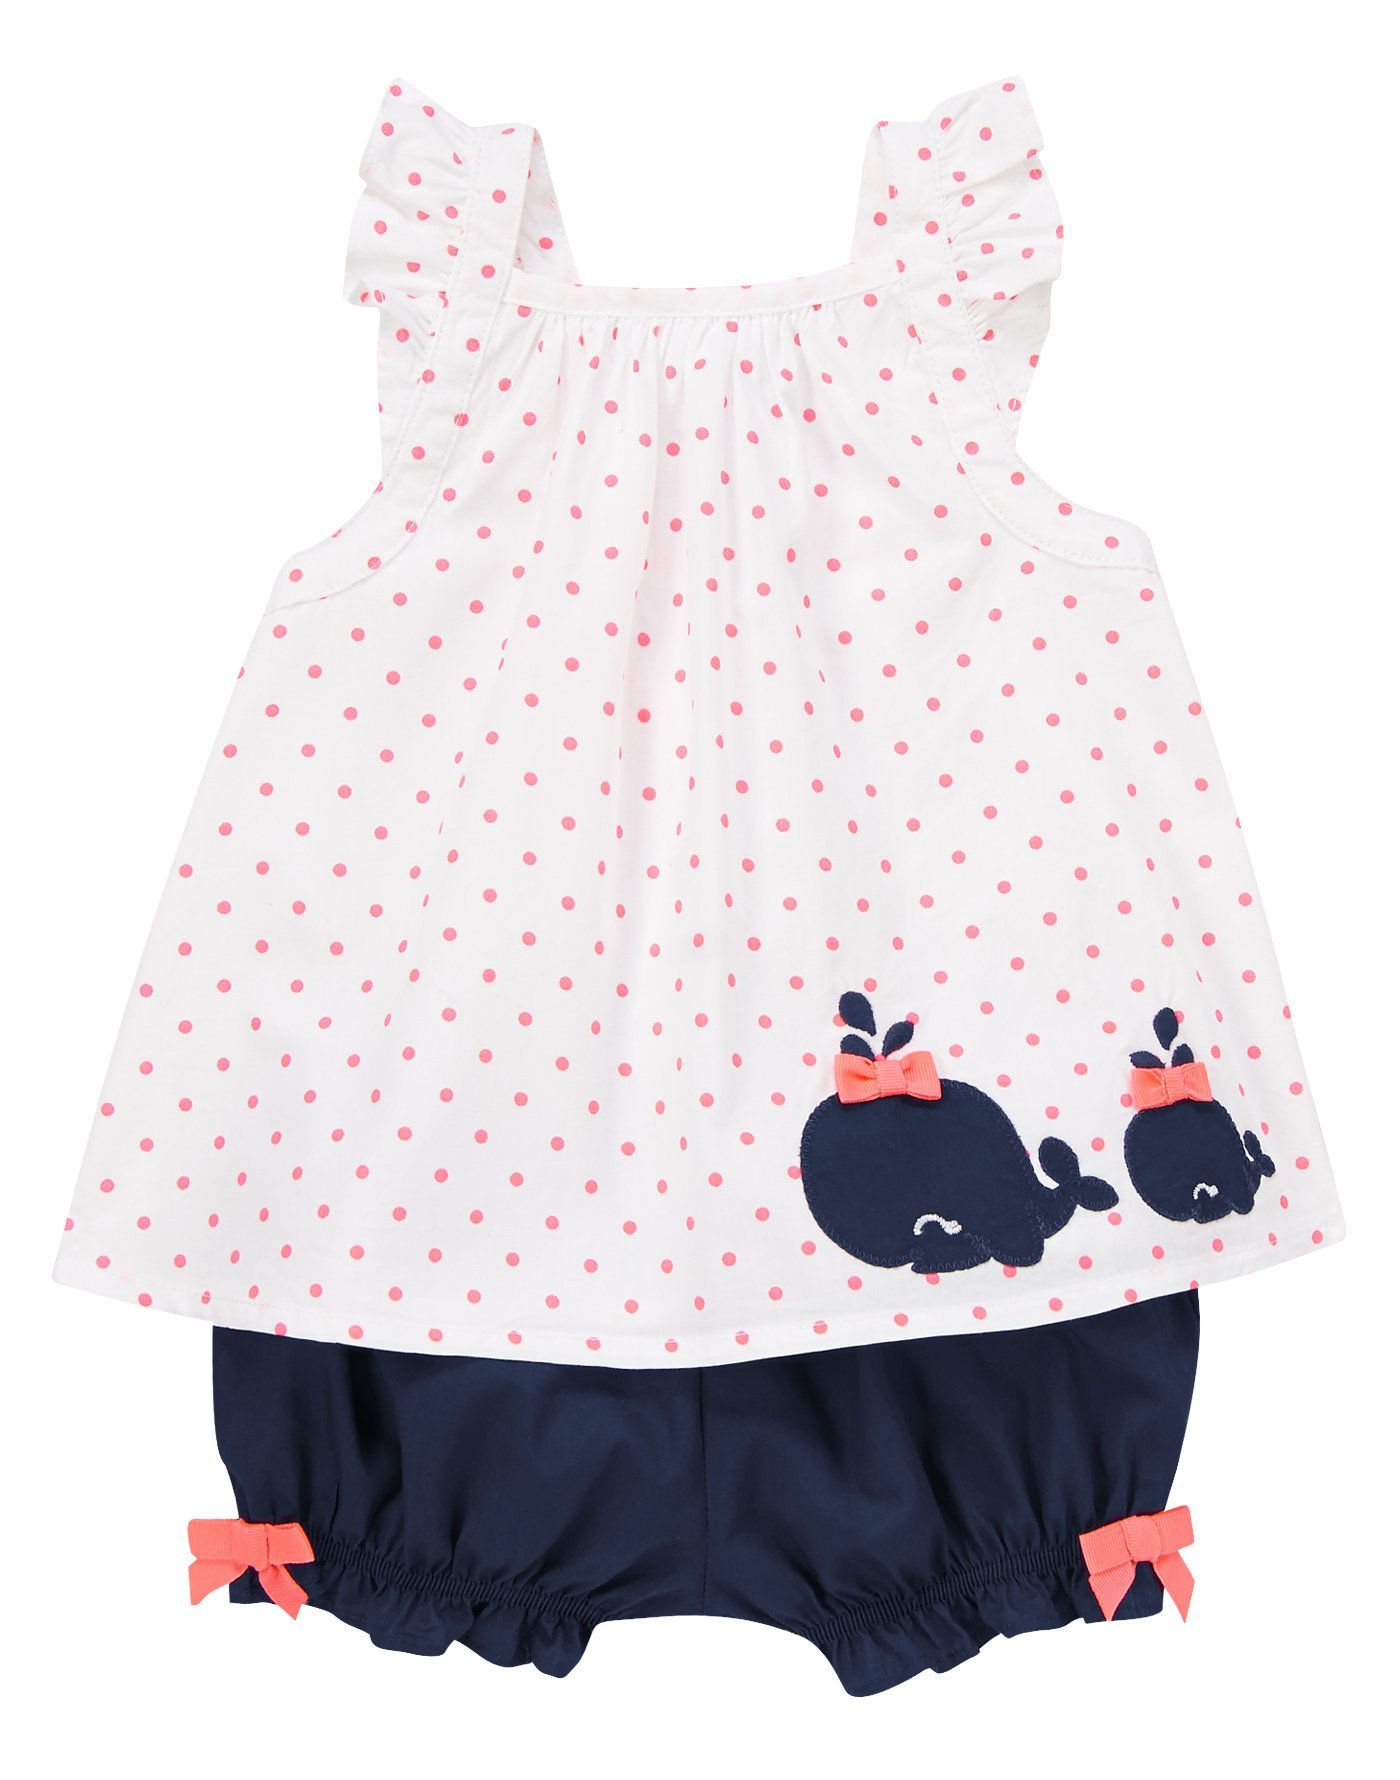 Dotty Whale Set at Gymboree. My 3rd daughter has way too many clothes, but this I could not resist…